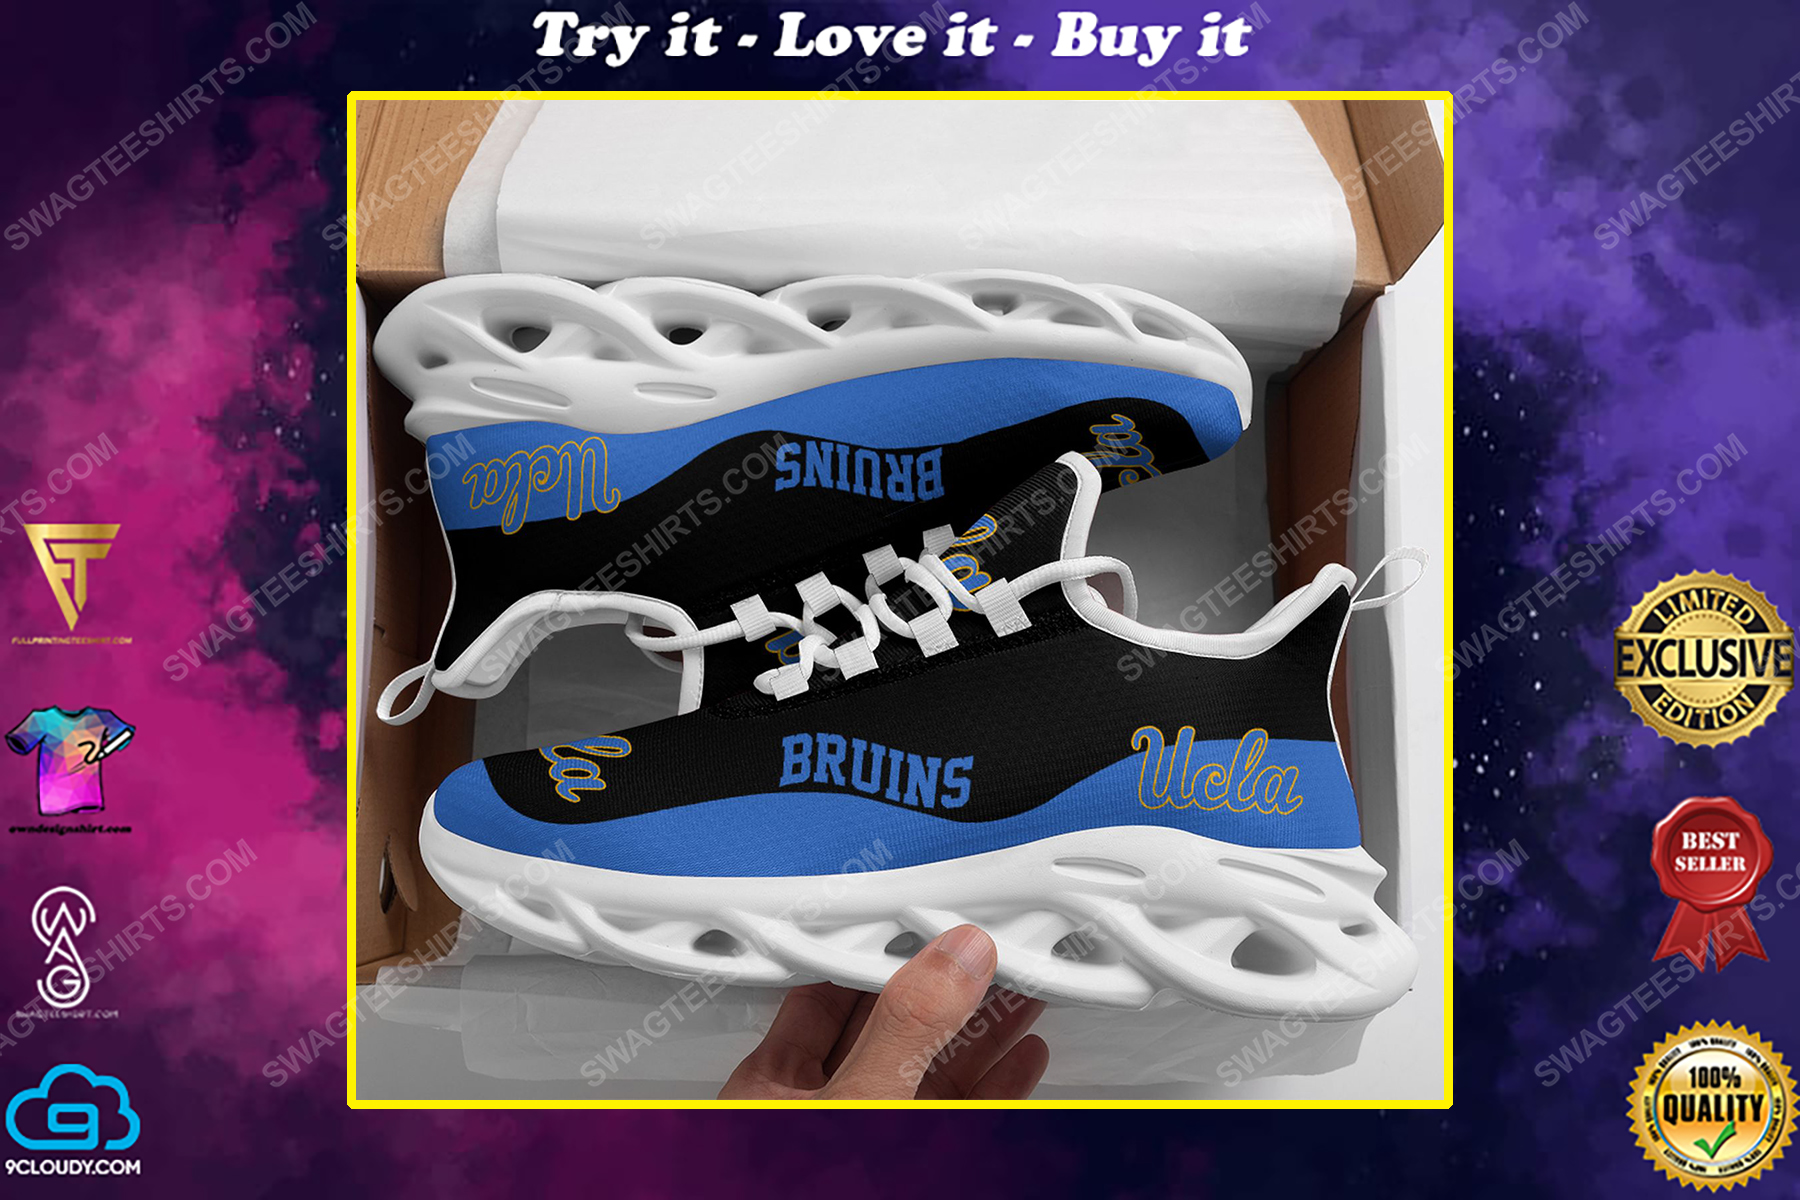 The ucla bruins football team max soul shoes